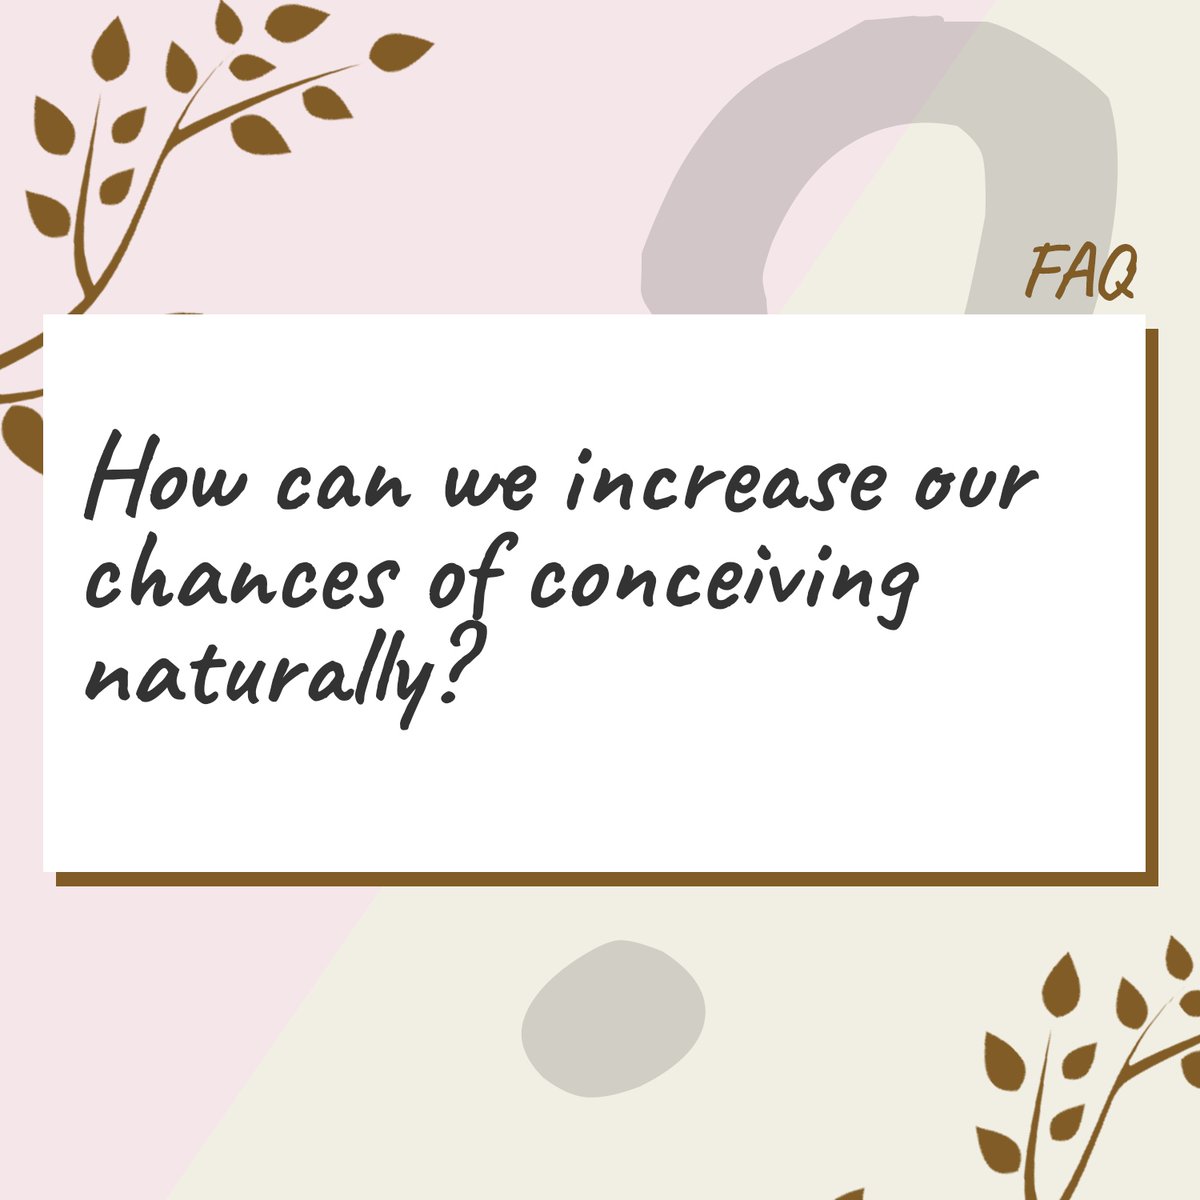 There are several ways to improve your chances of conceiving naturally including lifestyle changes such as maintaining a healthy weight, lowering alcohol consumption, adding supplements to your diet, and more!  

#FertilityWellnessInstitute #JourneyToParenthood